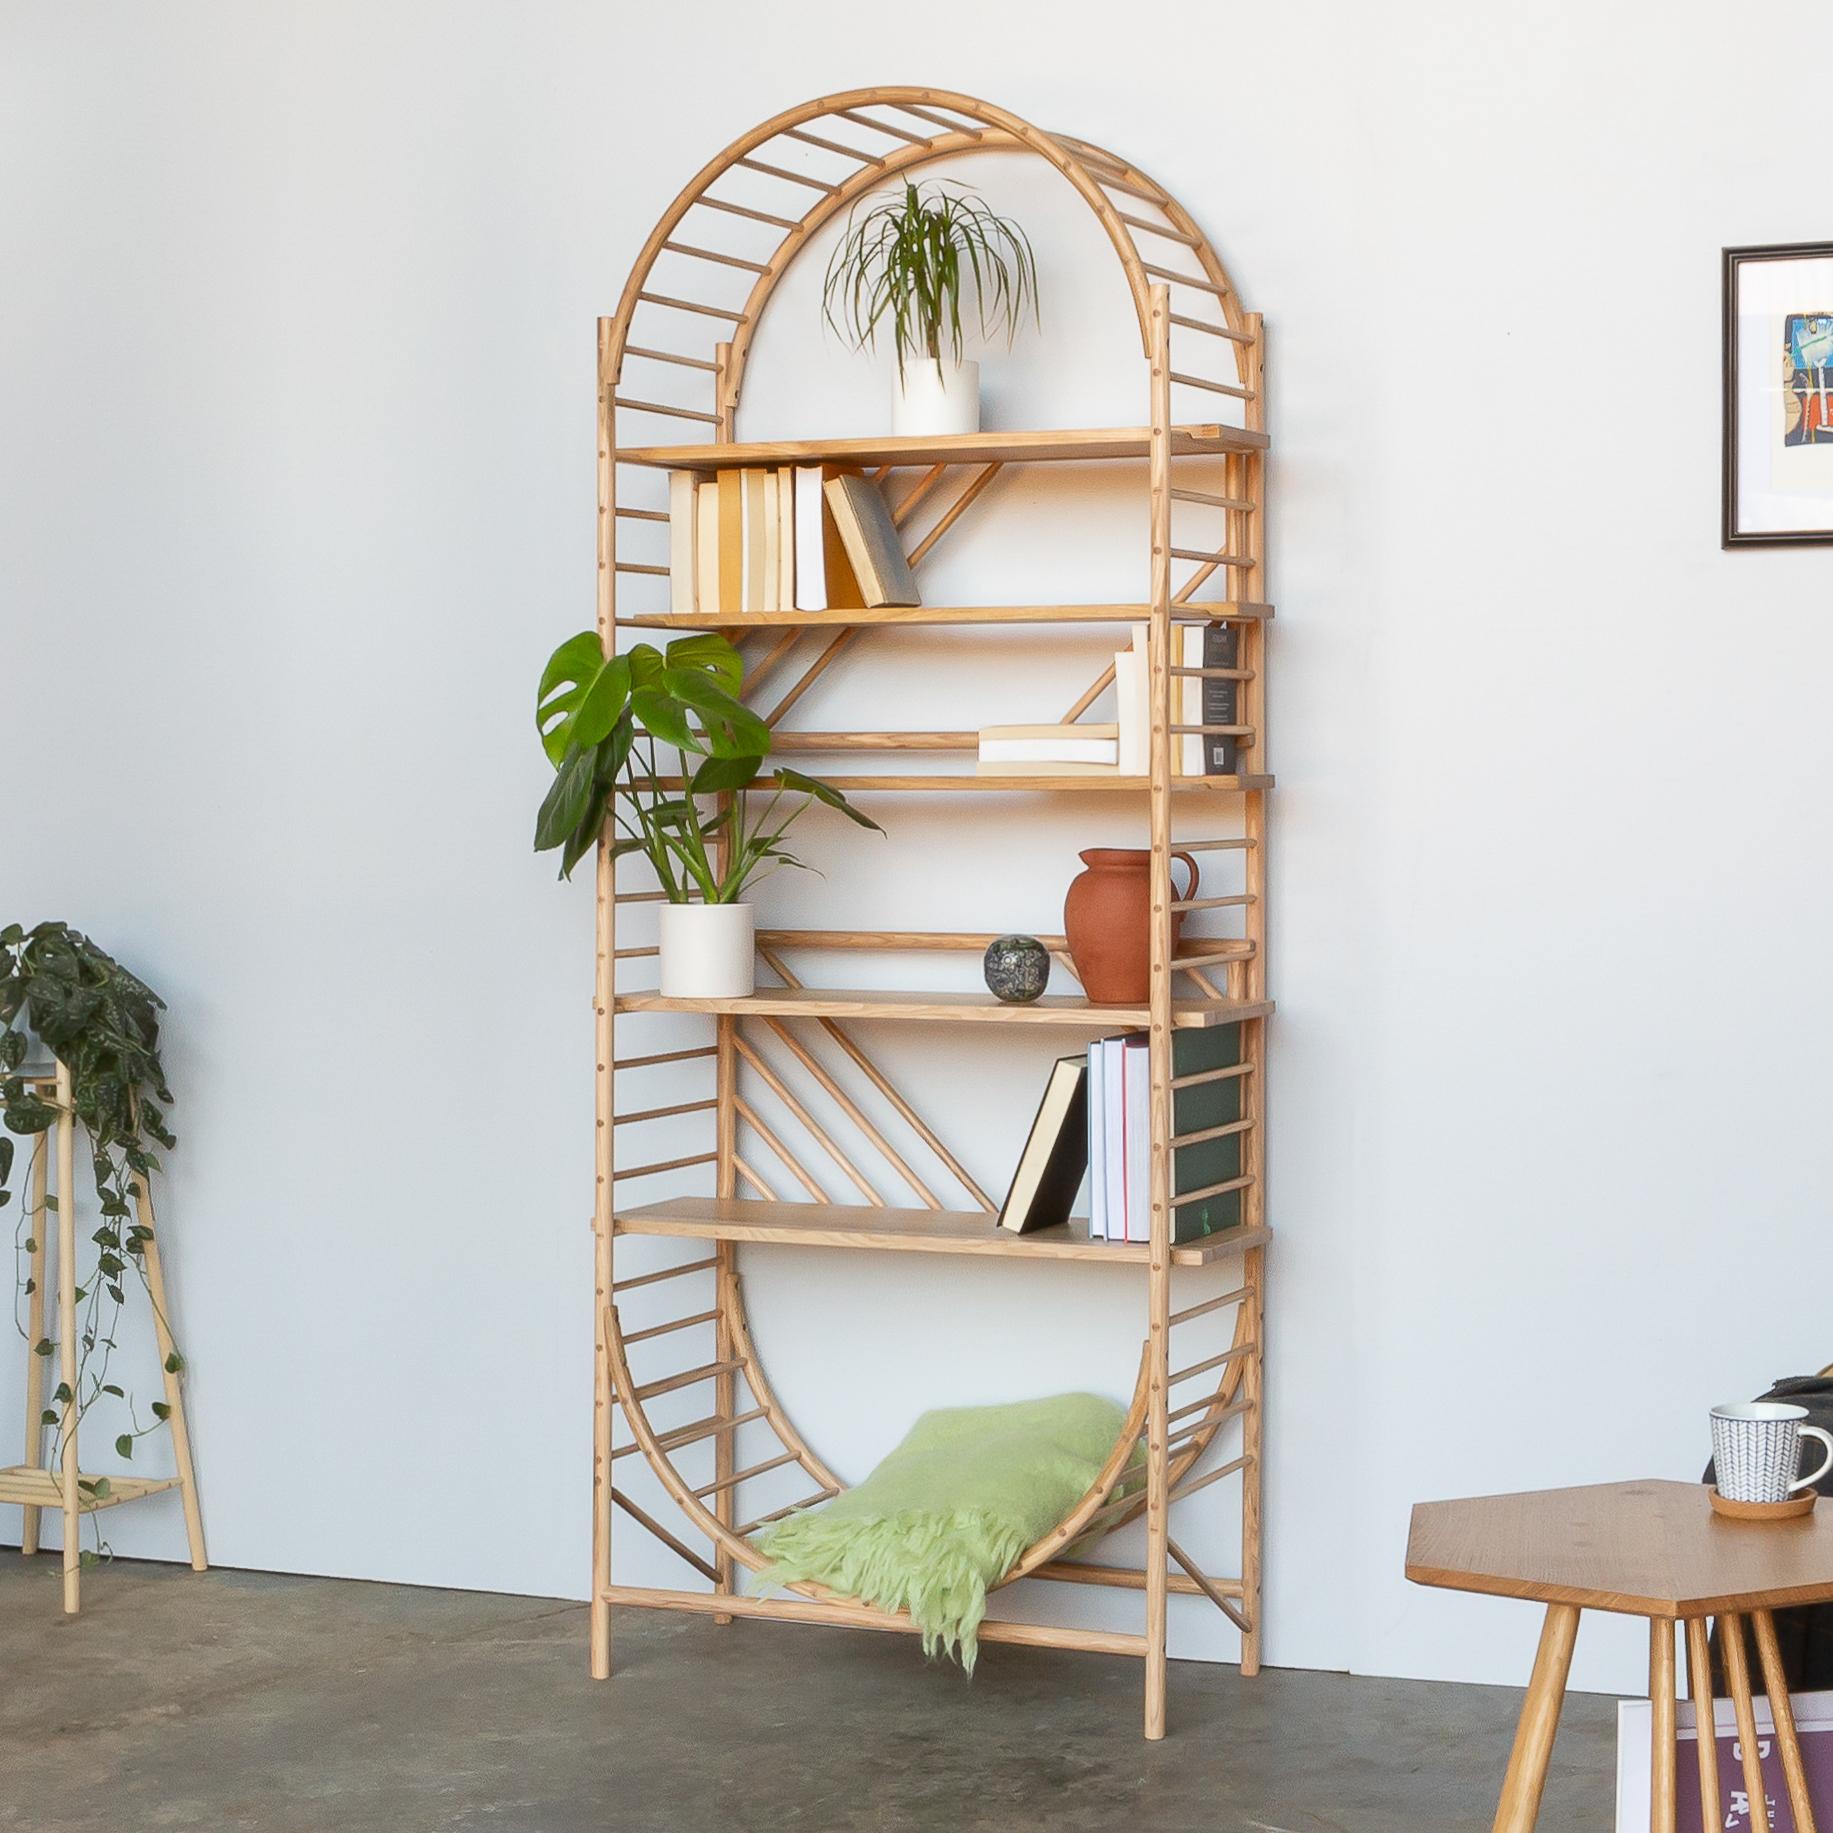 TRELLIS Shelving was designed to be a freestanding shelving system handcrafted from solid and steam bent wood, that could be used as a room divider, accessible from both sides and easily customisable by the user. To create a substantial piece of